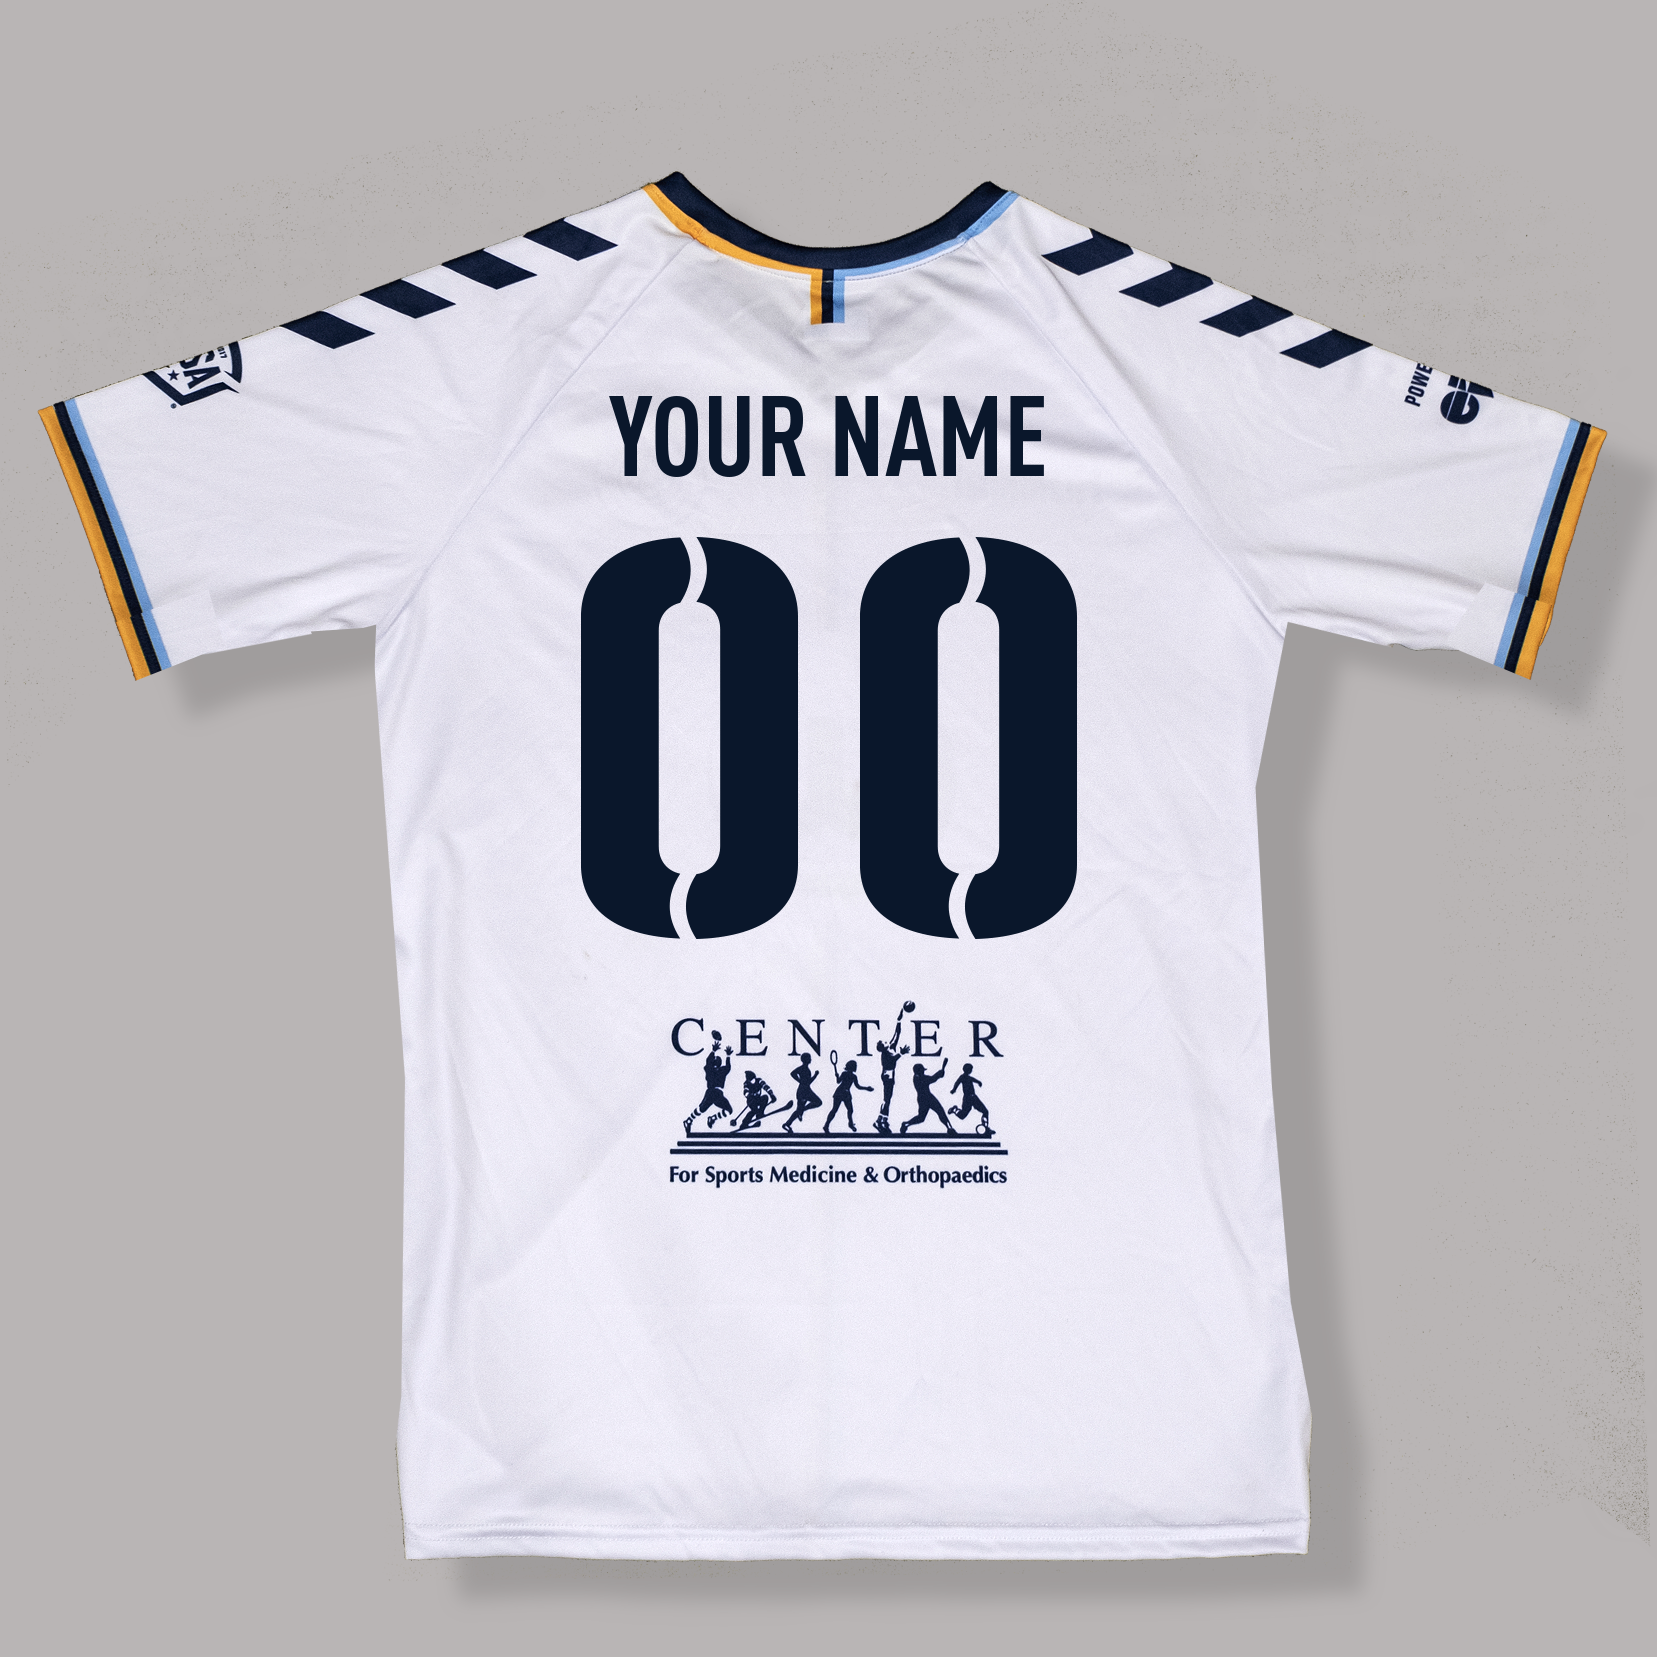 Create custom Leicester City FC jersey 2021/2022 II with your name